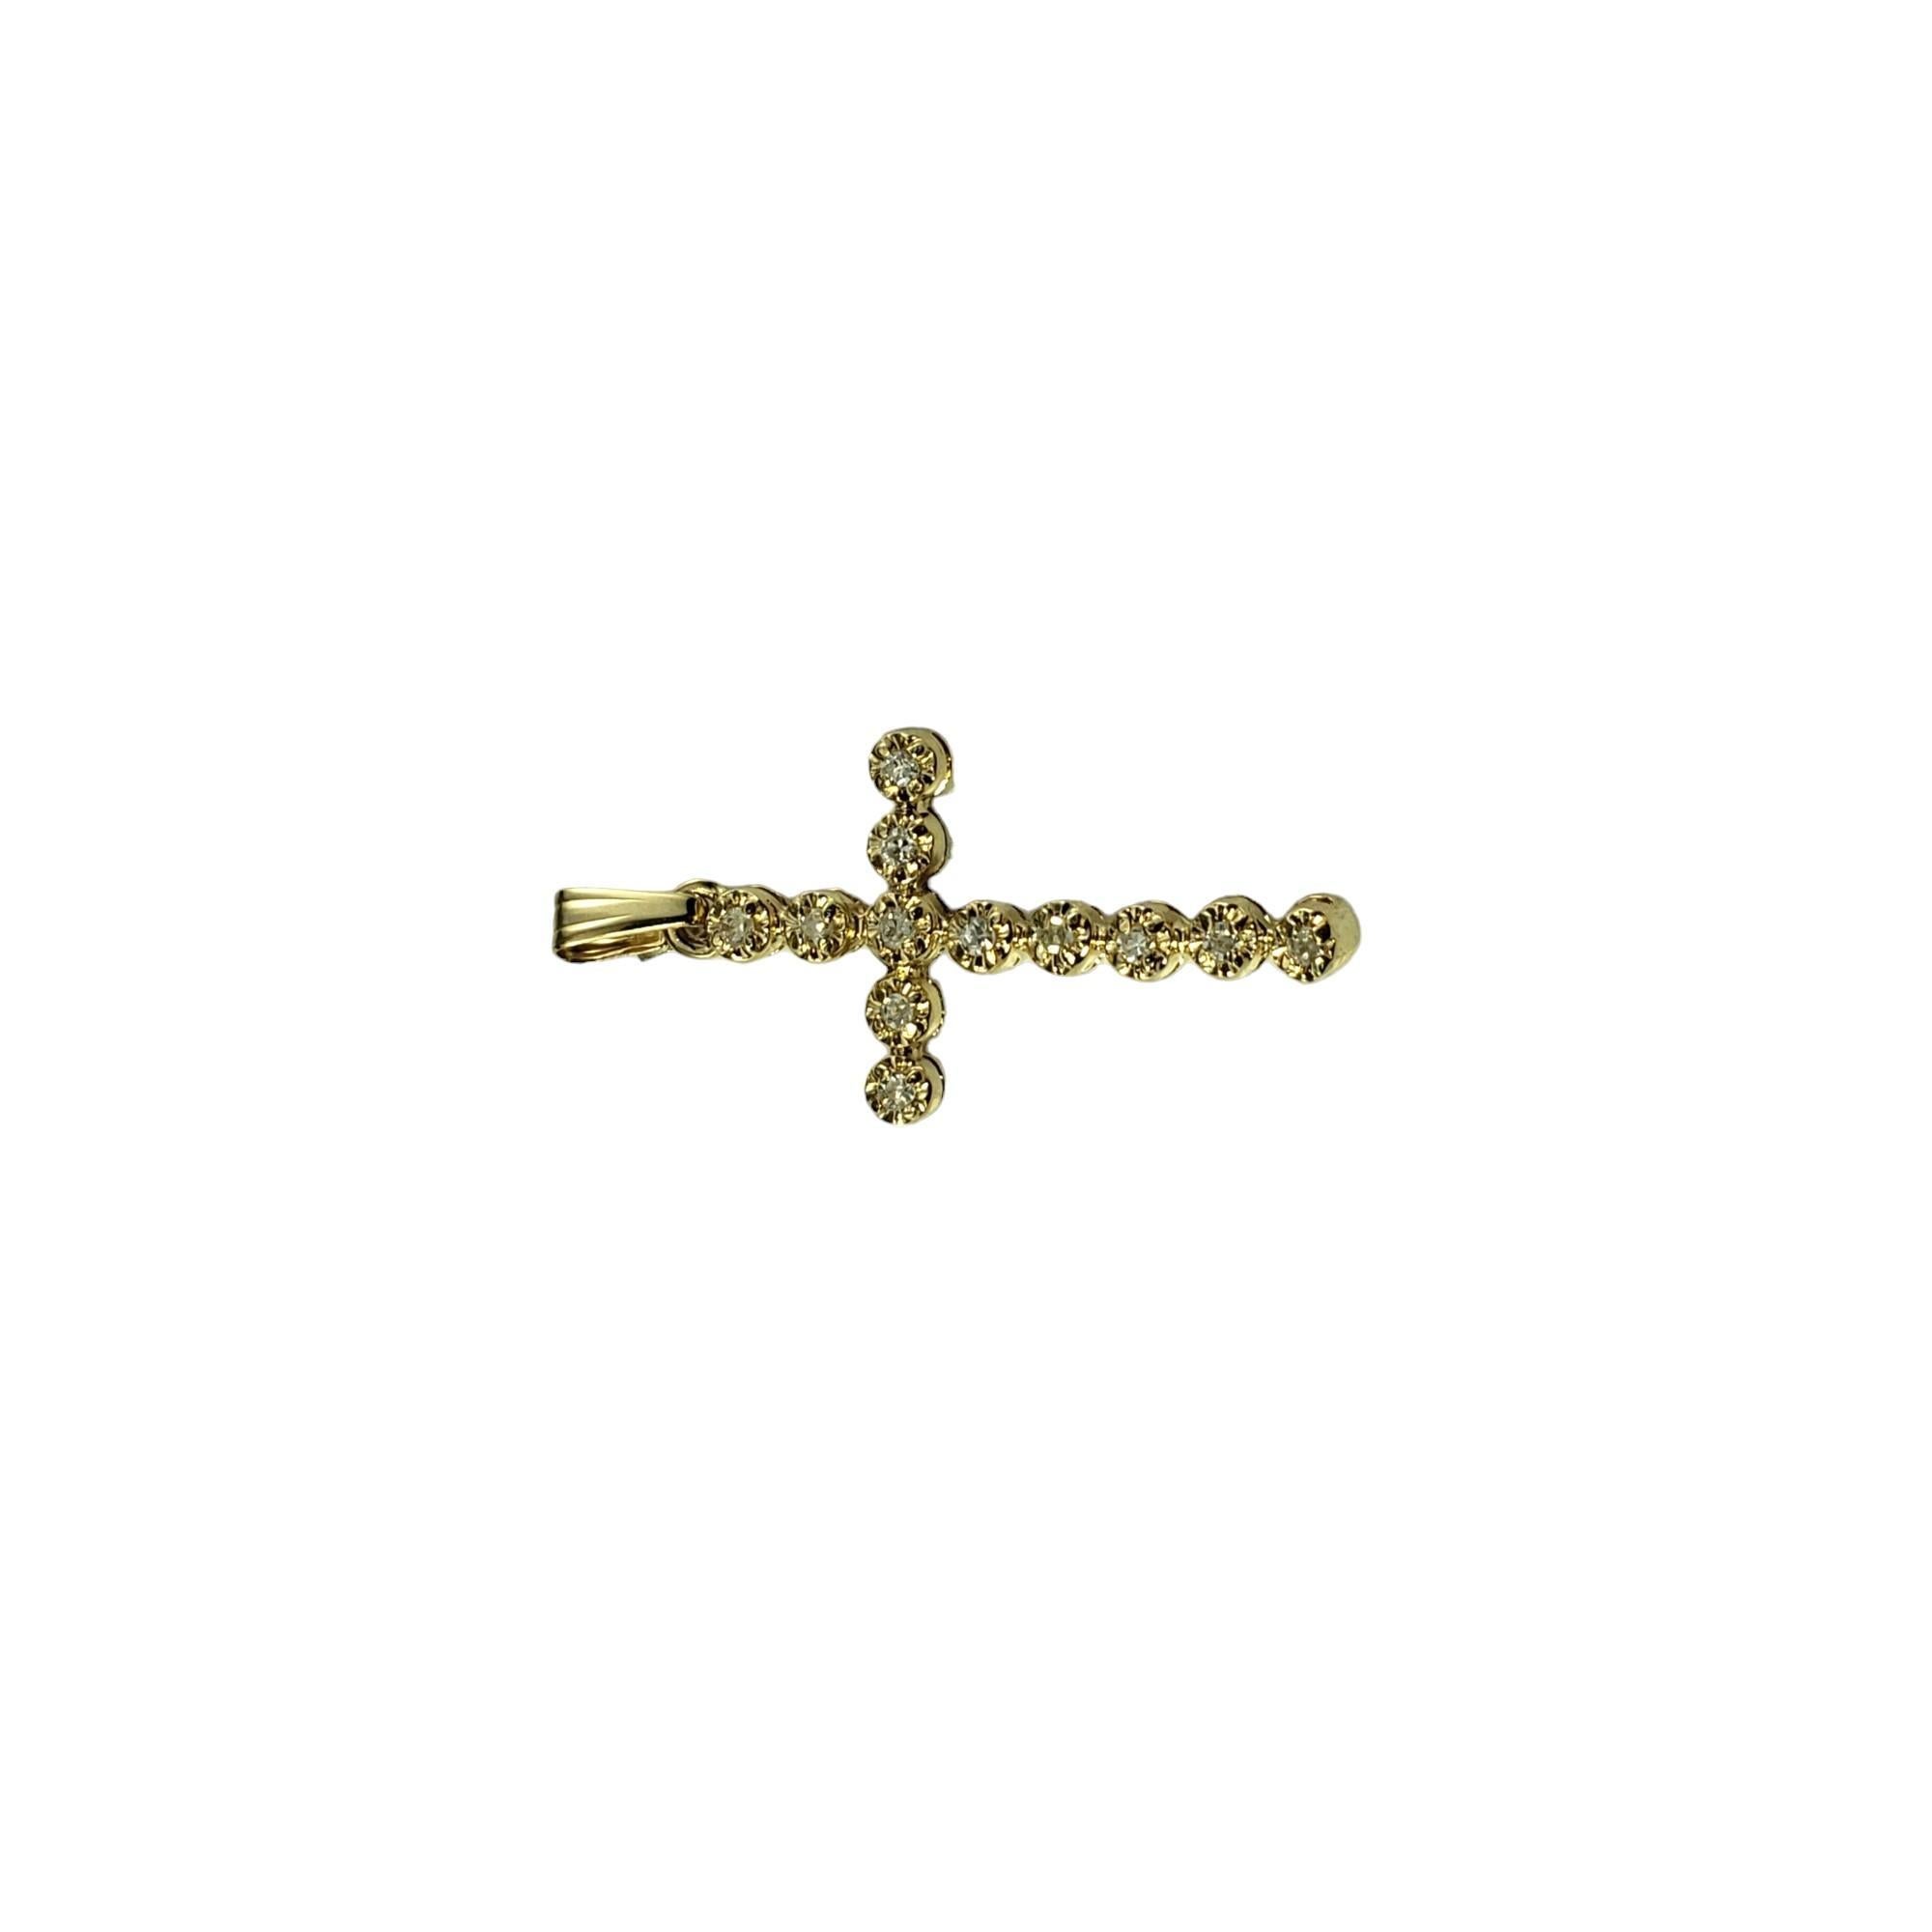 Vintage 14K Yellow Gold Diamond Cross Pendant-

This sparkling pendant features 12 round single cut diamonds set in classic 14K yellow gold.

Approximate total diamond weight: .10 ct.

Diamond color: I

Diamond clarity: I1-I2

Size: 24 mm x 14